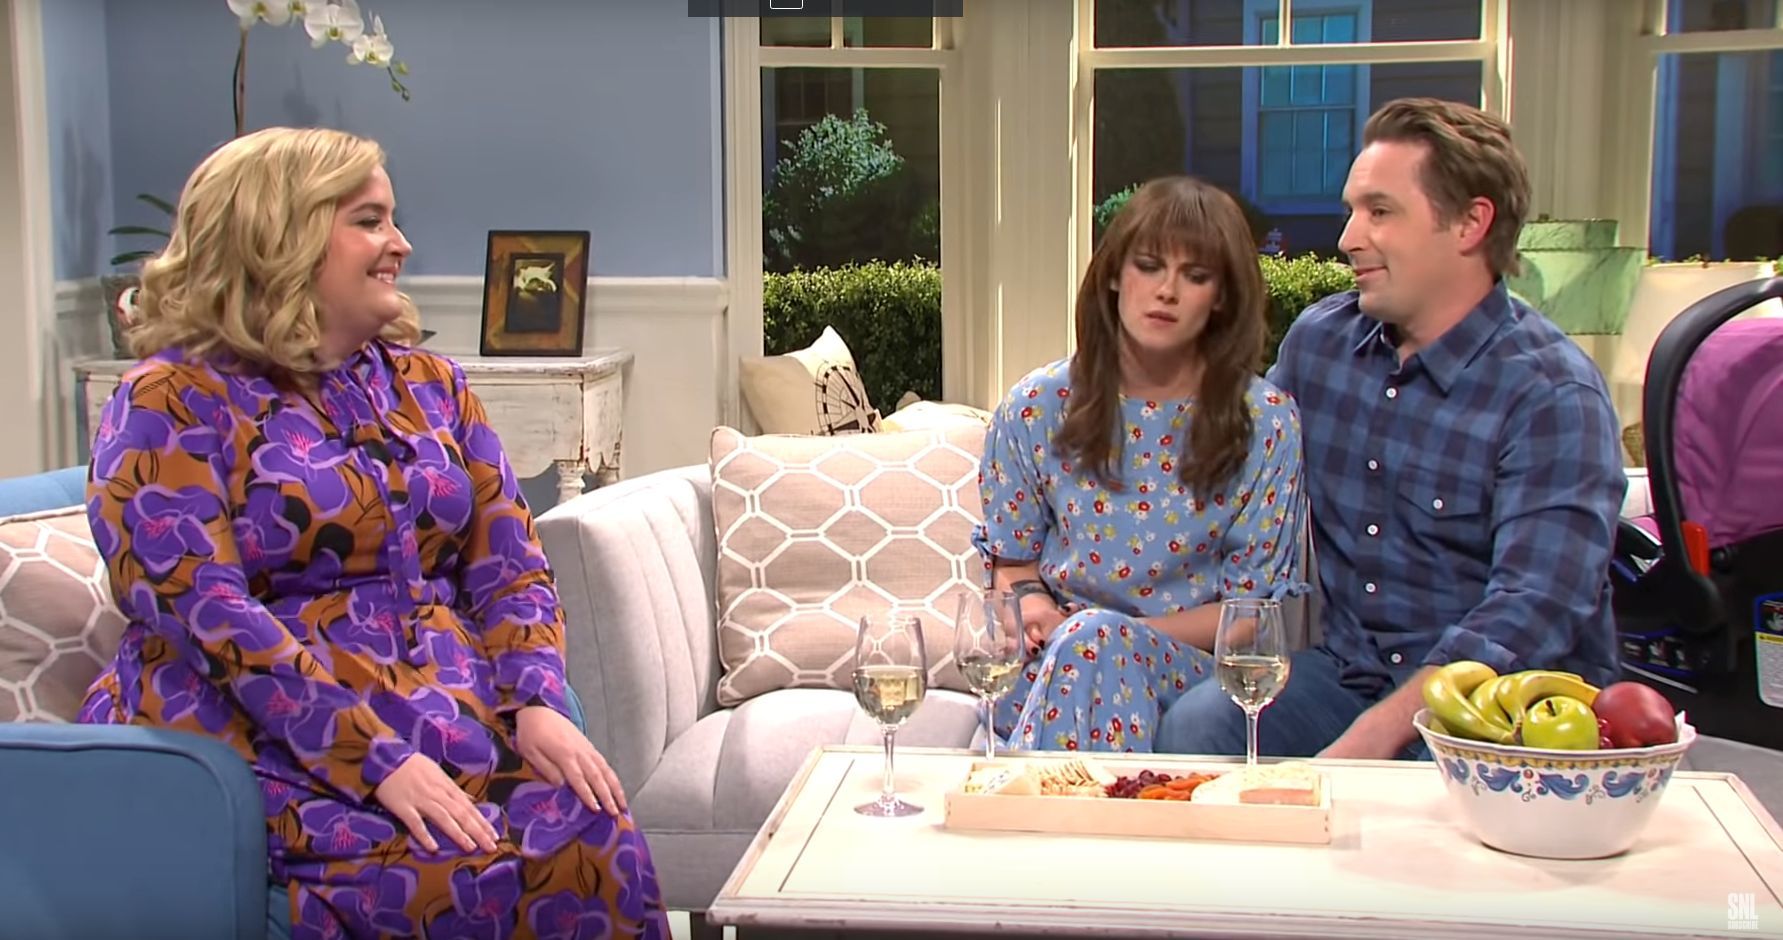 Aidy Bryant, Kristen Stewart and Beck Bennett in the Saturday Night Live sketch referencing Farrow & Ball